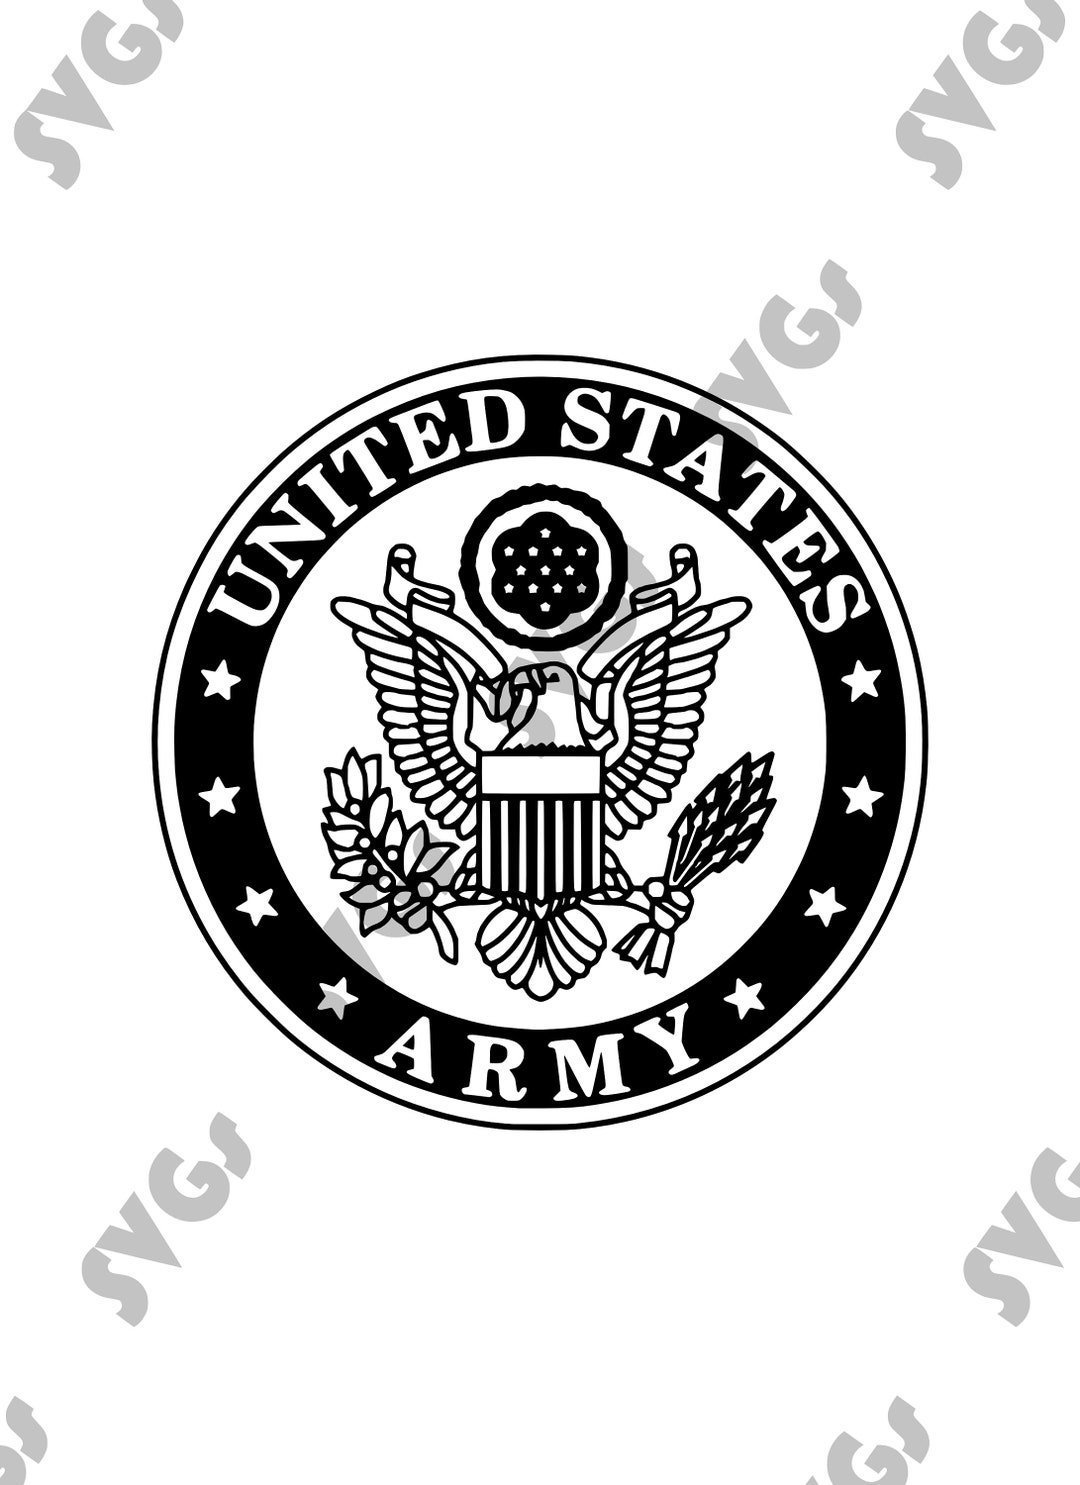 US Army Military Logo Svg, Jpg, Png Crafting Images - Etsy